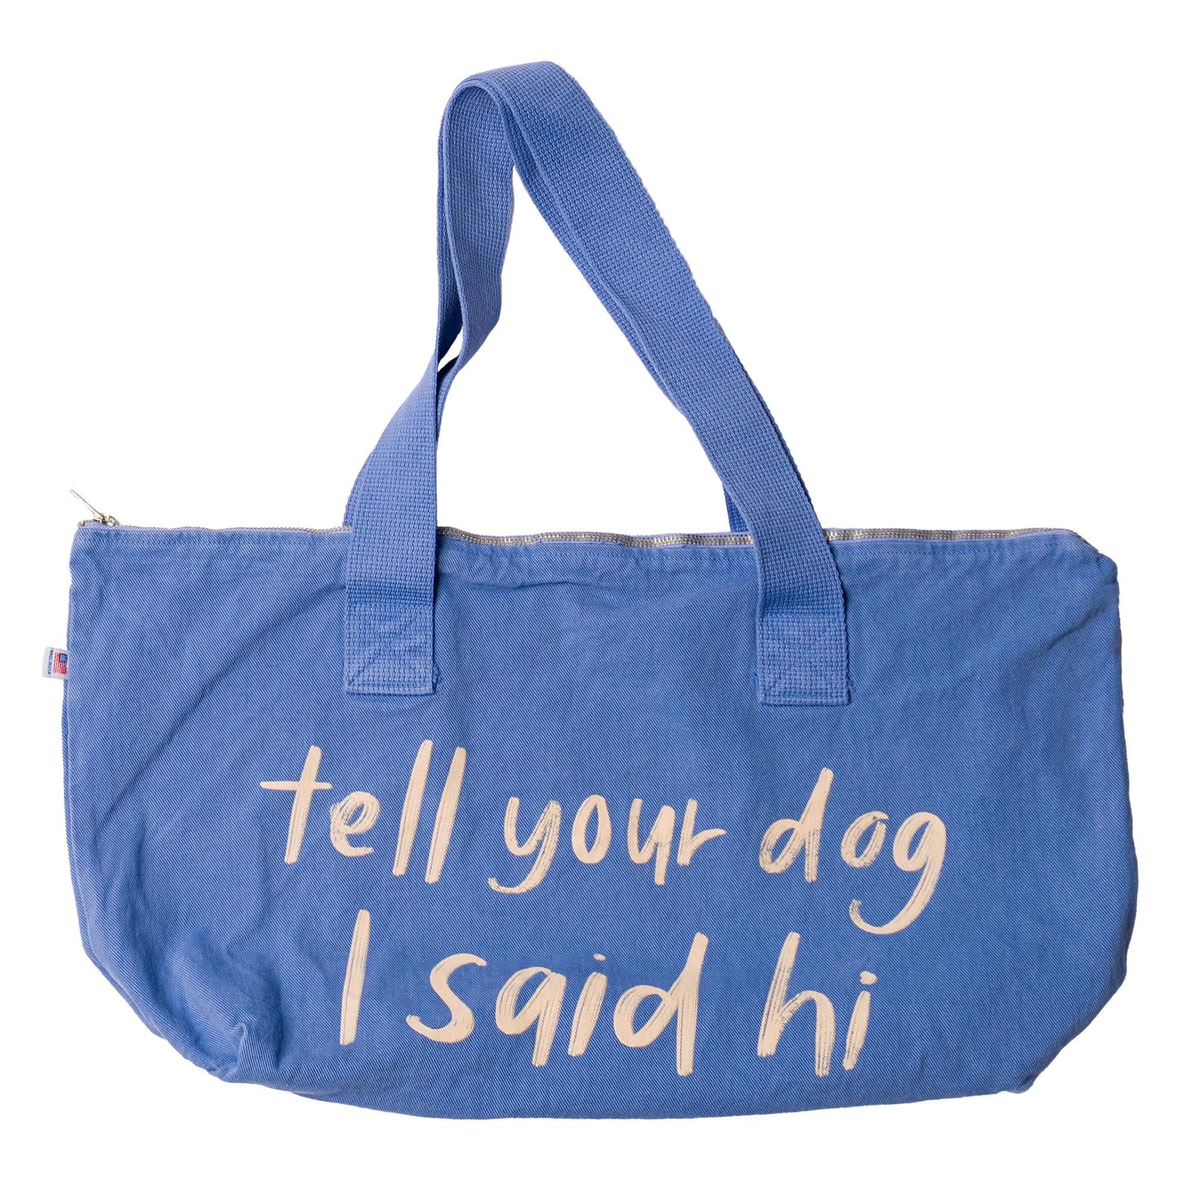 Totes – WeRateDogs